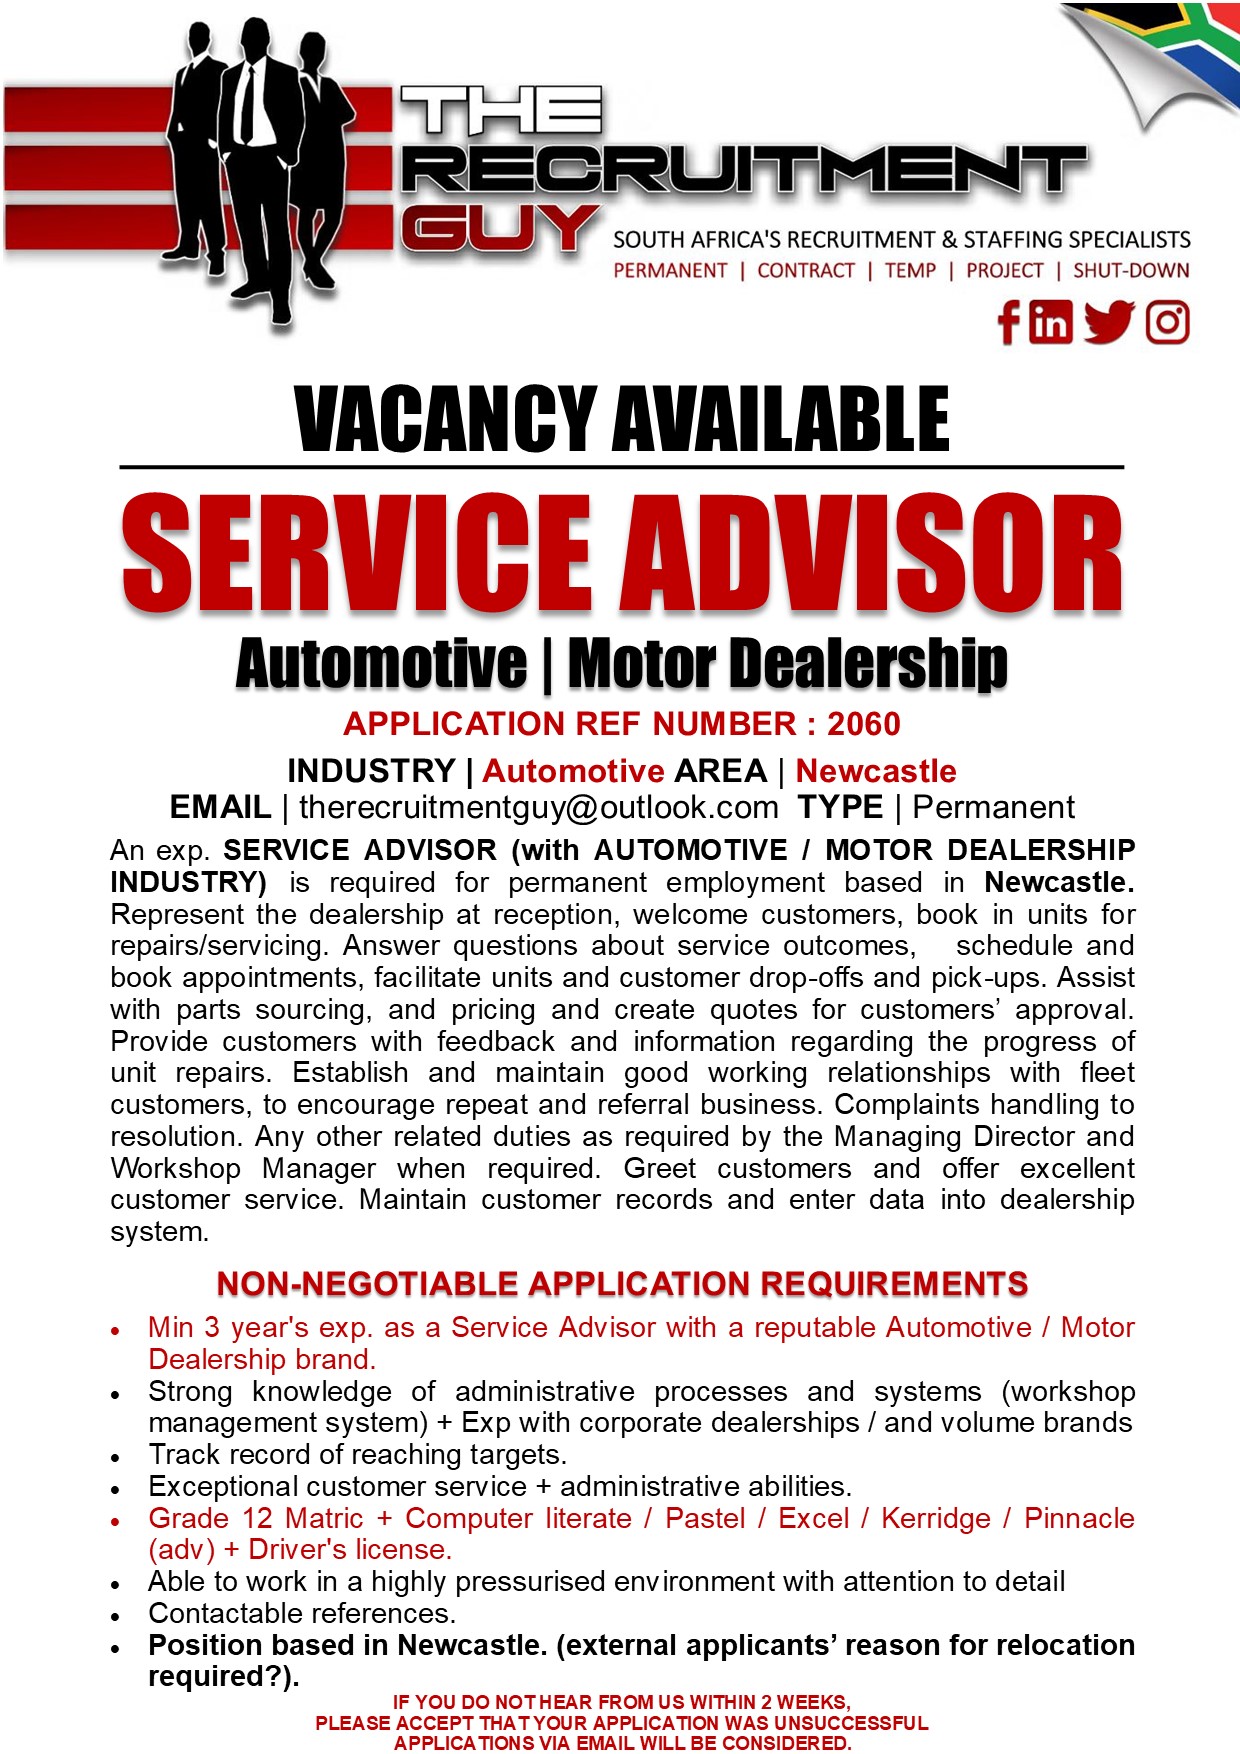 GUY SOUTH AFRICA'S RECRUITMENT &amp; STAFFING SPECIALISTS

VACANCY AVAILABLE

APPLICATION REF NUMBER : 2060

INDUSTRY | Automotive AREA | Newcastle
EMAIL | therecruitmentguy@outlook.com TYPE | Permanent

An exp. SERVICE ADVISOR (with AUTOMOTIVE / MOTOR DEALERSHIP
INDUSTRY) is required for permanent employment based in Newcastle.
Represent the dealership at reception, welcome customers, book in units for
repairs/servicing. Answer questions about service outcomes, schedule and
book appointments, facilitate units and customer drop-offs and pick-ups. Assist
with parts sourcing, and pricing and create quotes for customers’ approval
Provide customers with feedback and information regarding the progress of
unit repairs. Establish and maintain good working relationships with fleet
customers, to encourage repeat and referral business. Complaints handling to
resolution. Any other related duties as required by the Managing Director and
Workshop Manager when required. Greet customers and offer excellent
customer service. Maintain customer records and enter data into dealership
system

NON-NEGOTIABLE APPLICATION REQUIREMENTS

« Min 3 year's exp. as a Service Advisor with a reputable Automotive / Motor
Dealership brand

« Strong knowledge of administrative processes and systems (workshop
management system) + Exp with corporate dealerships / and volume brands

« Track record of reaching targets

« Exceptional customer service + administrative abilities

+ Grade 12 Matric + Computer literate / Pastel / Excel / Kerridge / Pinnacle
(adv) + Driver's license

« Able to work in a highly pressurised environment with attention to detail

« Contactable references

« Position based in Newcastle. (external applicants’ reason for relocation

required?).
IF YOU DO NOTHEAR FROM US WITHIN 2 WEEKS,
PLEASE ACCEPT THAT YOUR APPLICATION WAS UNSUCCESSFUL
APPLICATIONS VIA EMAIL WILL BE CONSIDERED.

PERMANENT | CONTRACT | TEMP | PROJECT | SHUT-DOWN

{ink JG]